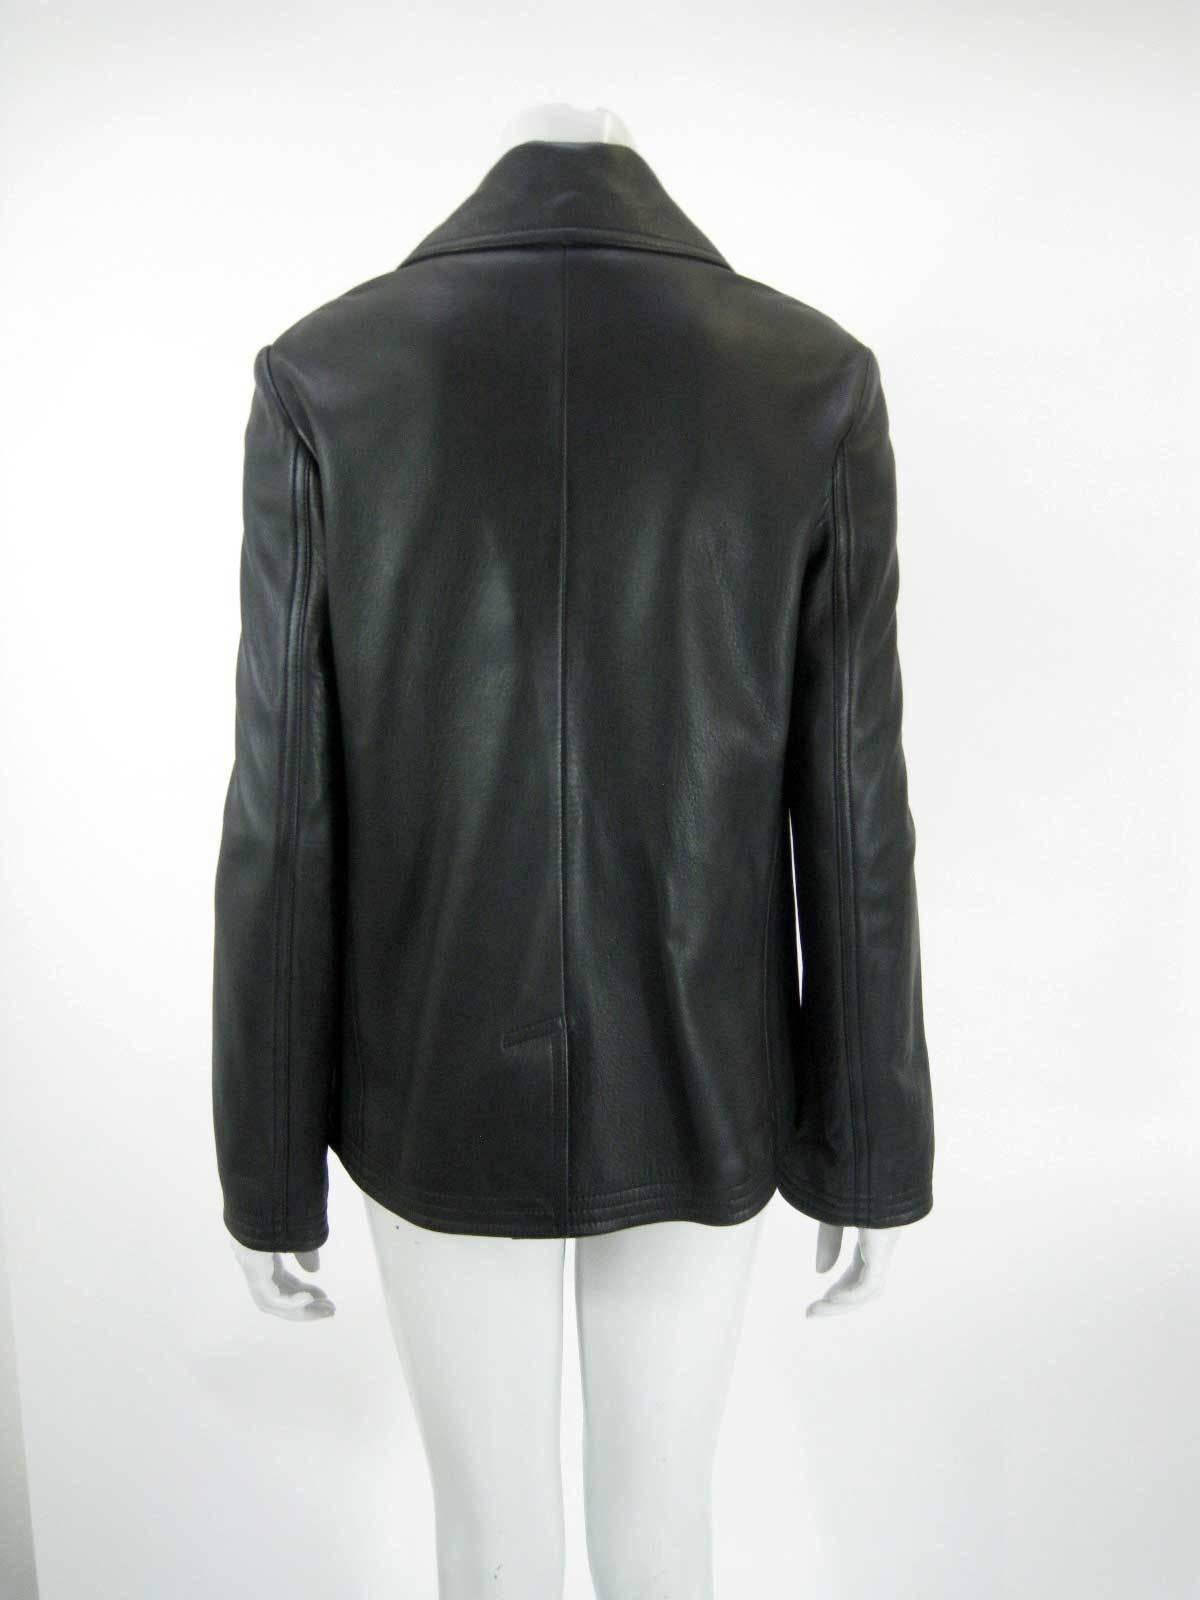 Balenciaga Leather Double Breasted Jacket In Excellent Condition For Sale In Oakland, CA